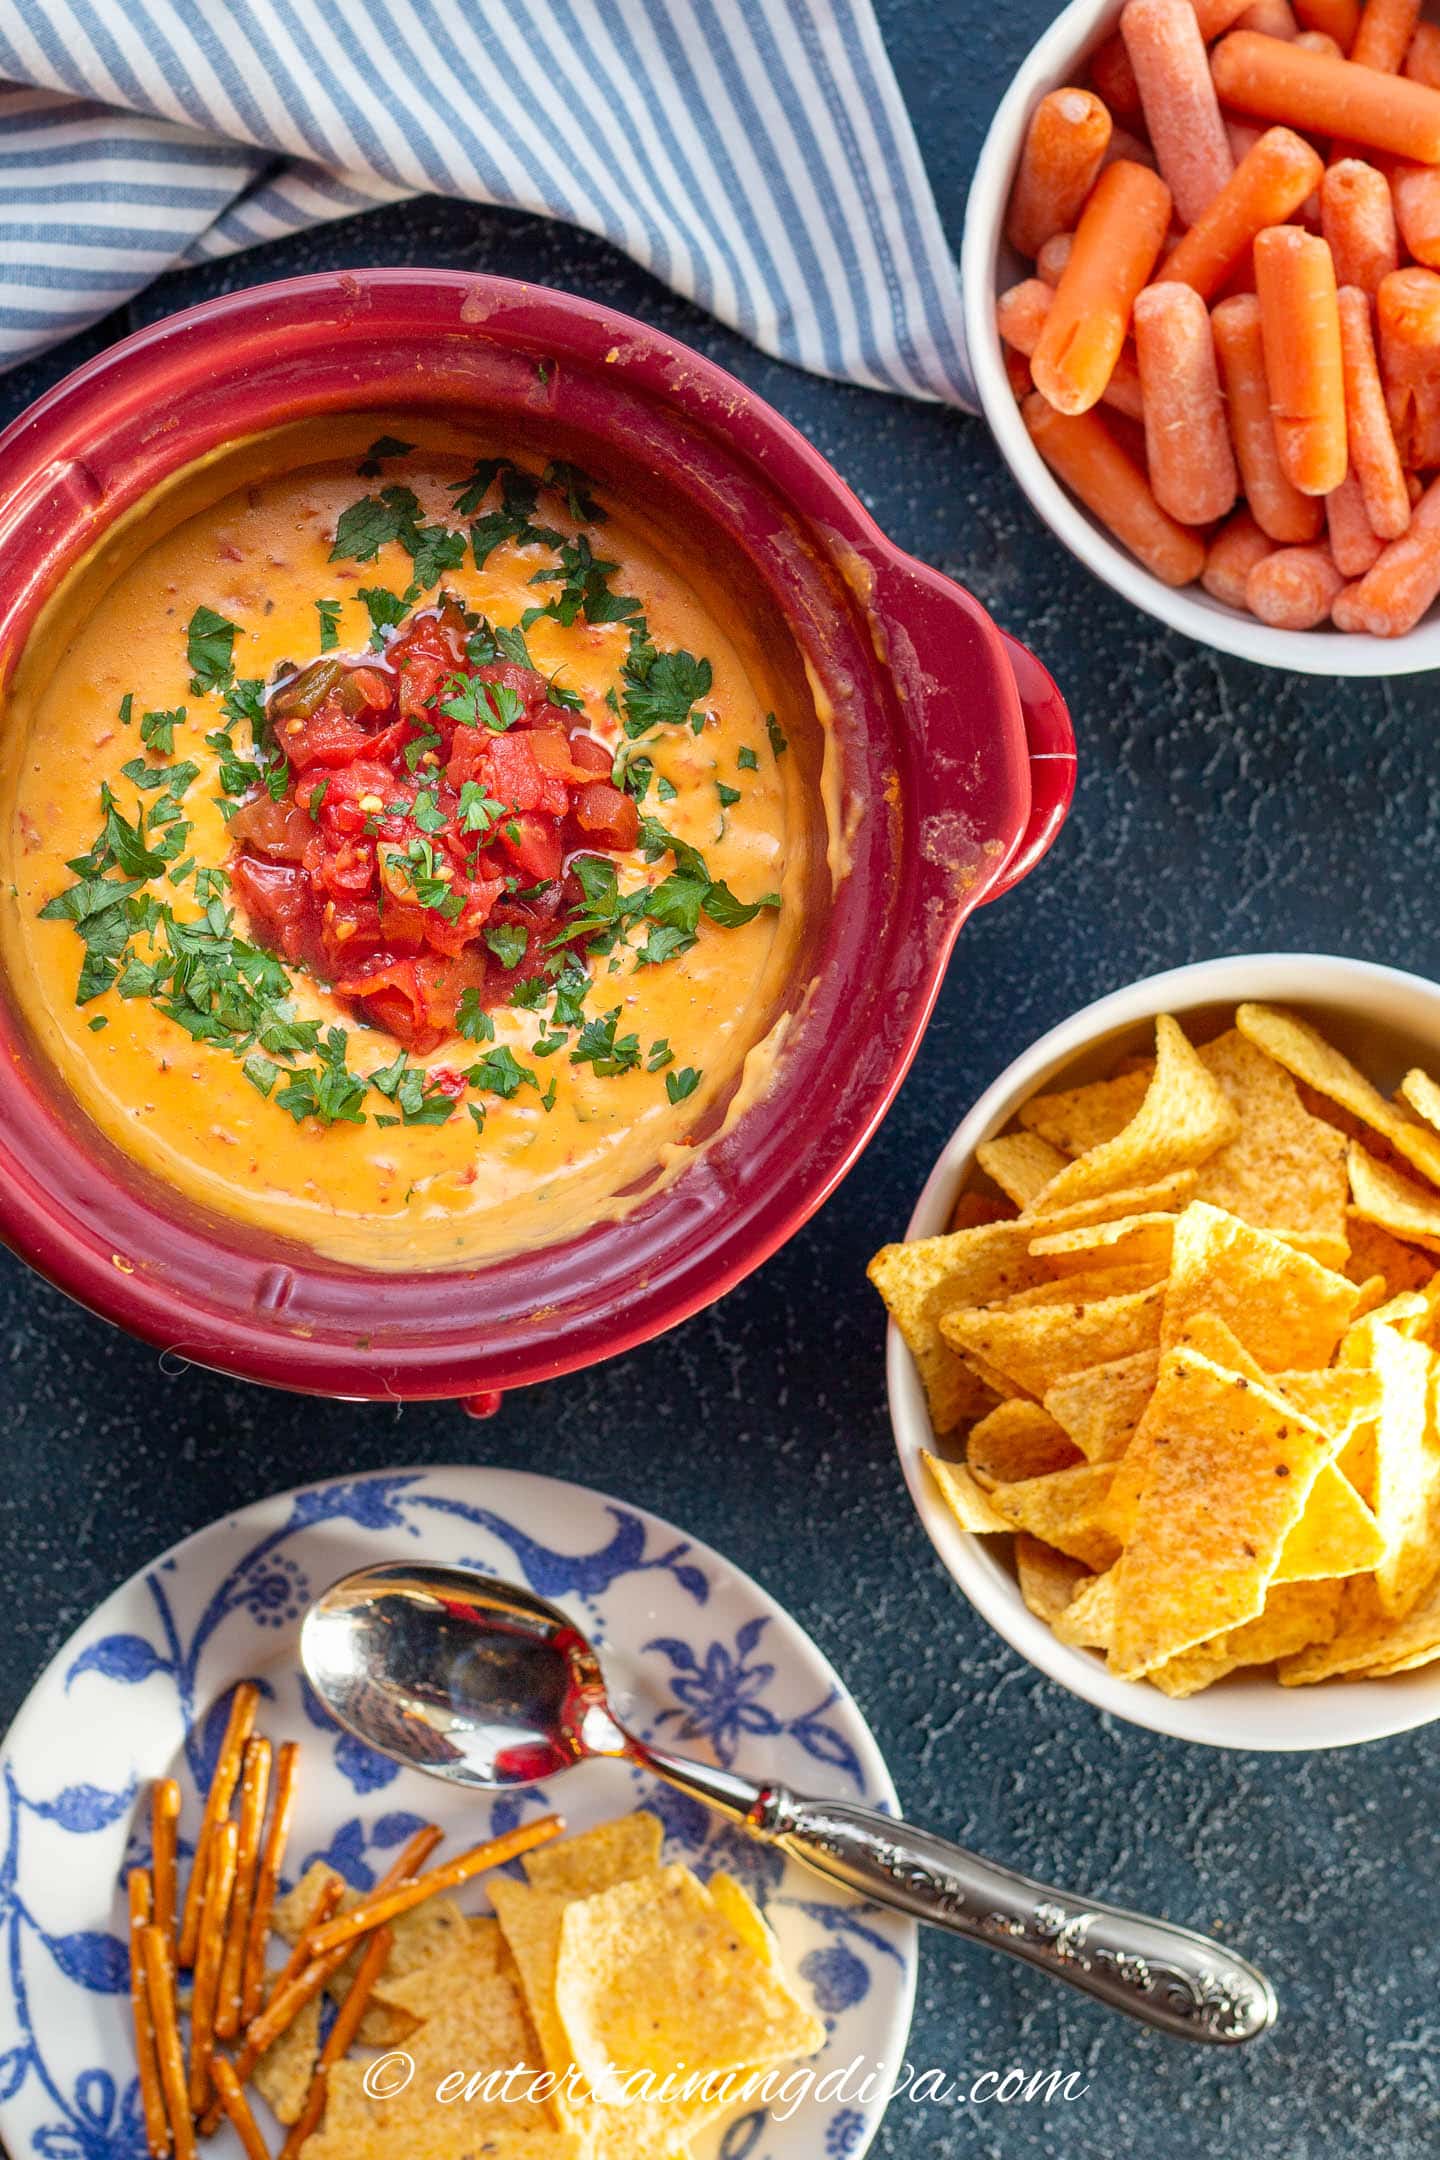 Velveeta Rotel cheese dip in a crock pot served with bowls of carrots, tortilla chips and pretzels